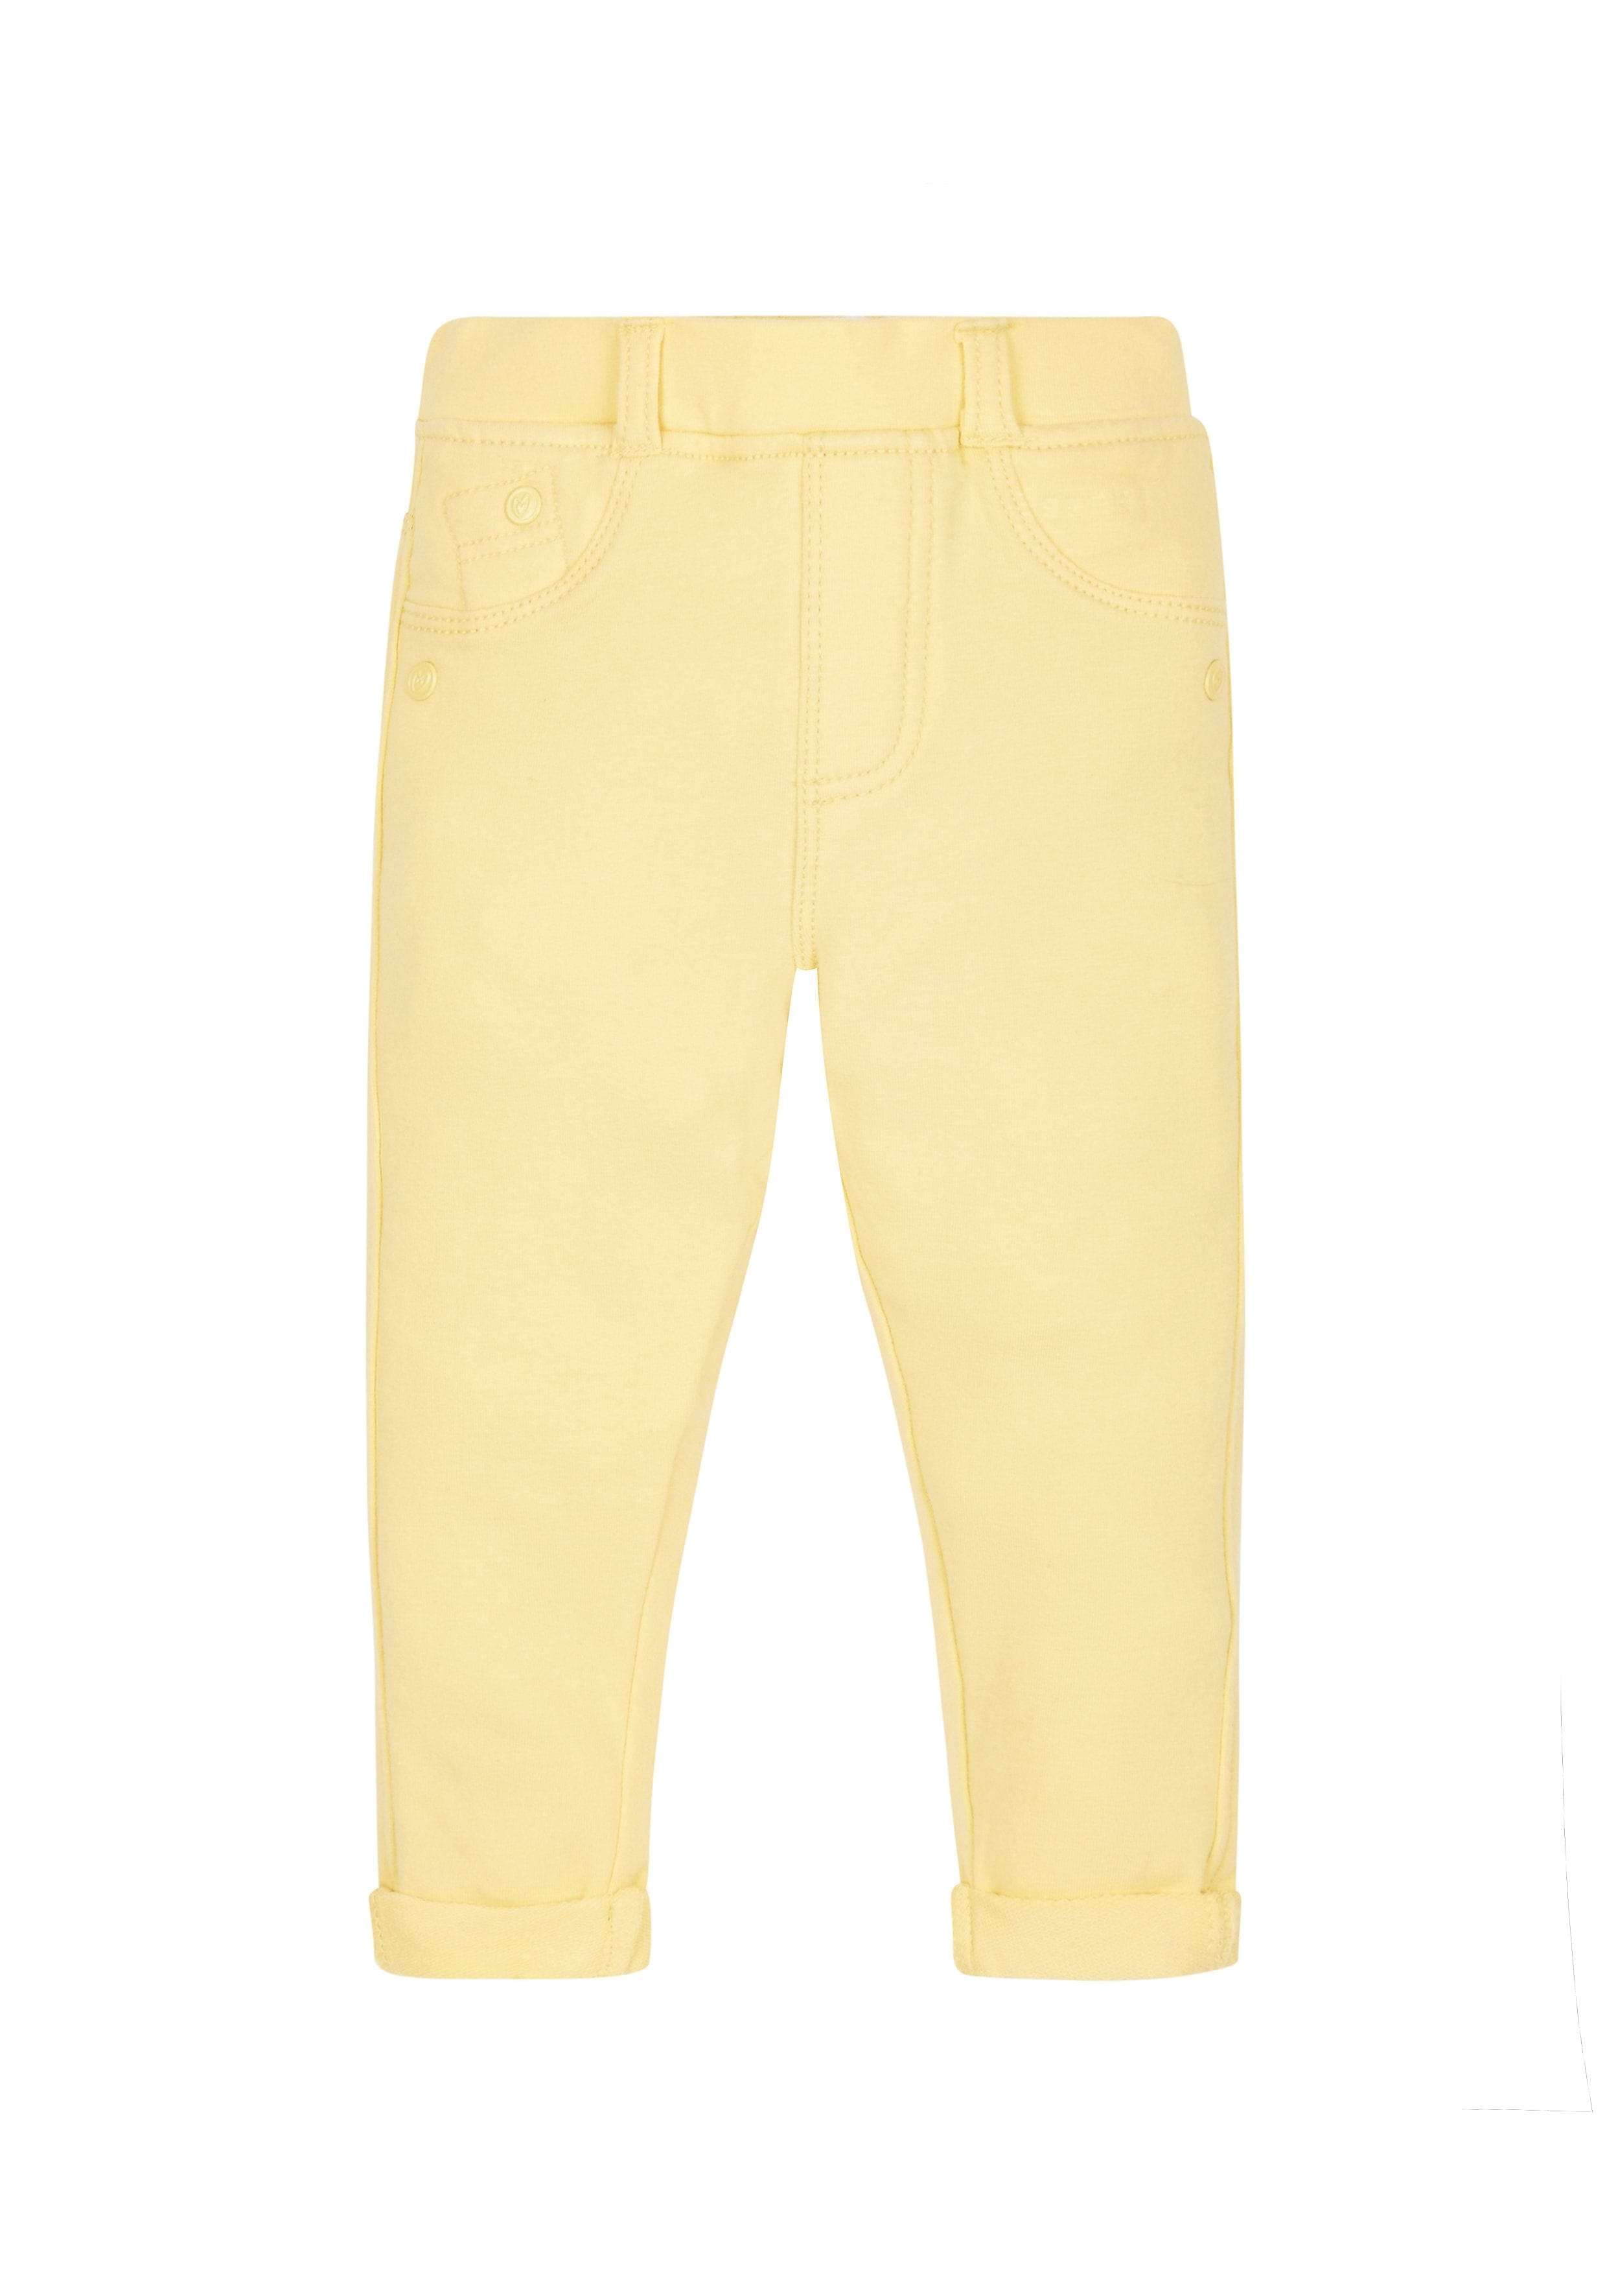 Mothercare | Girls Jeans - Yellow 0